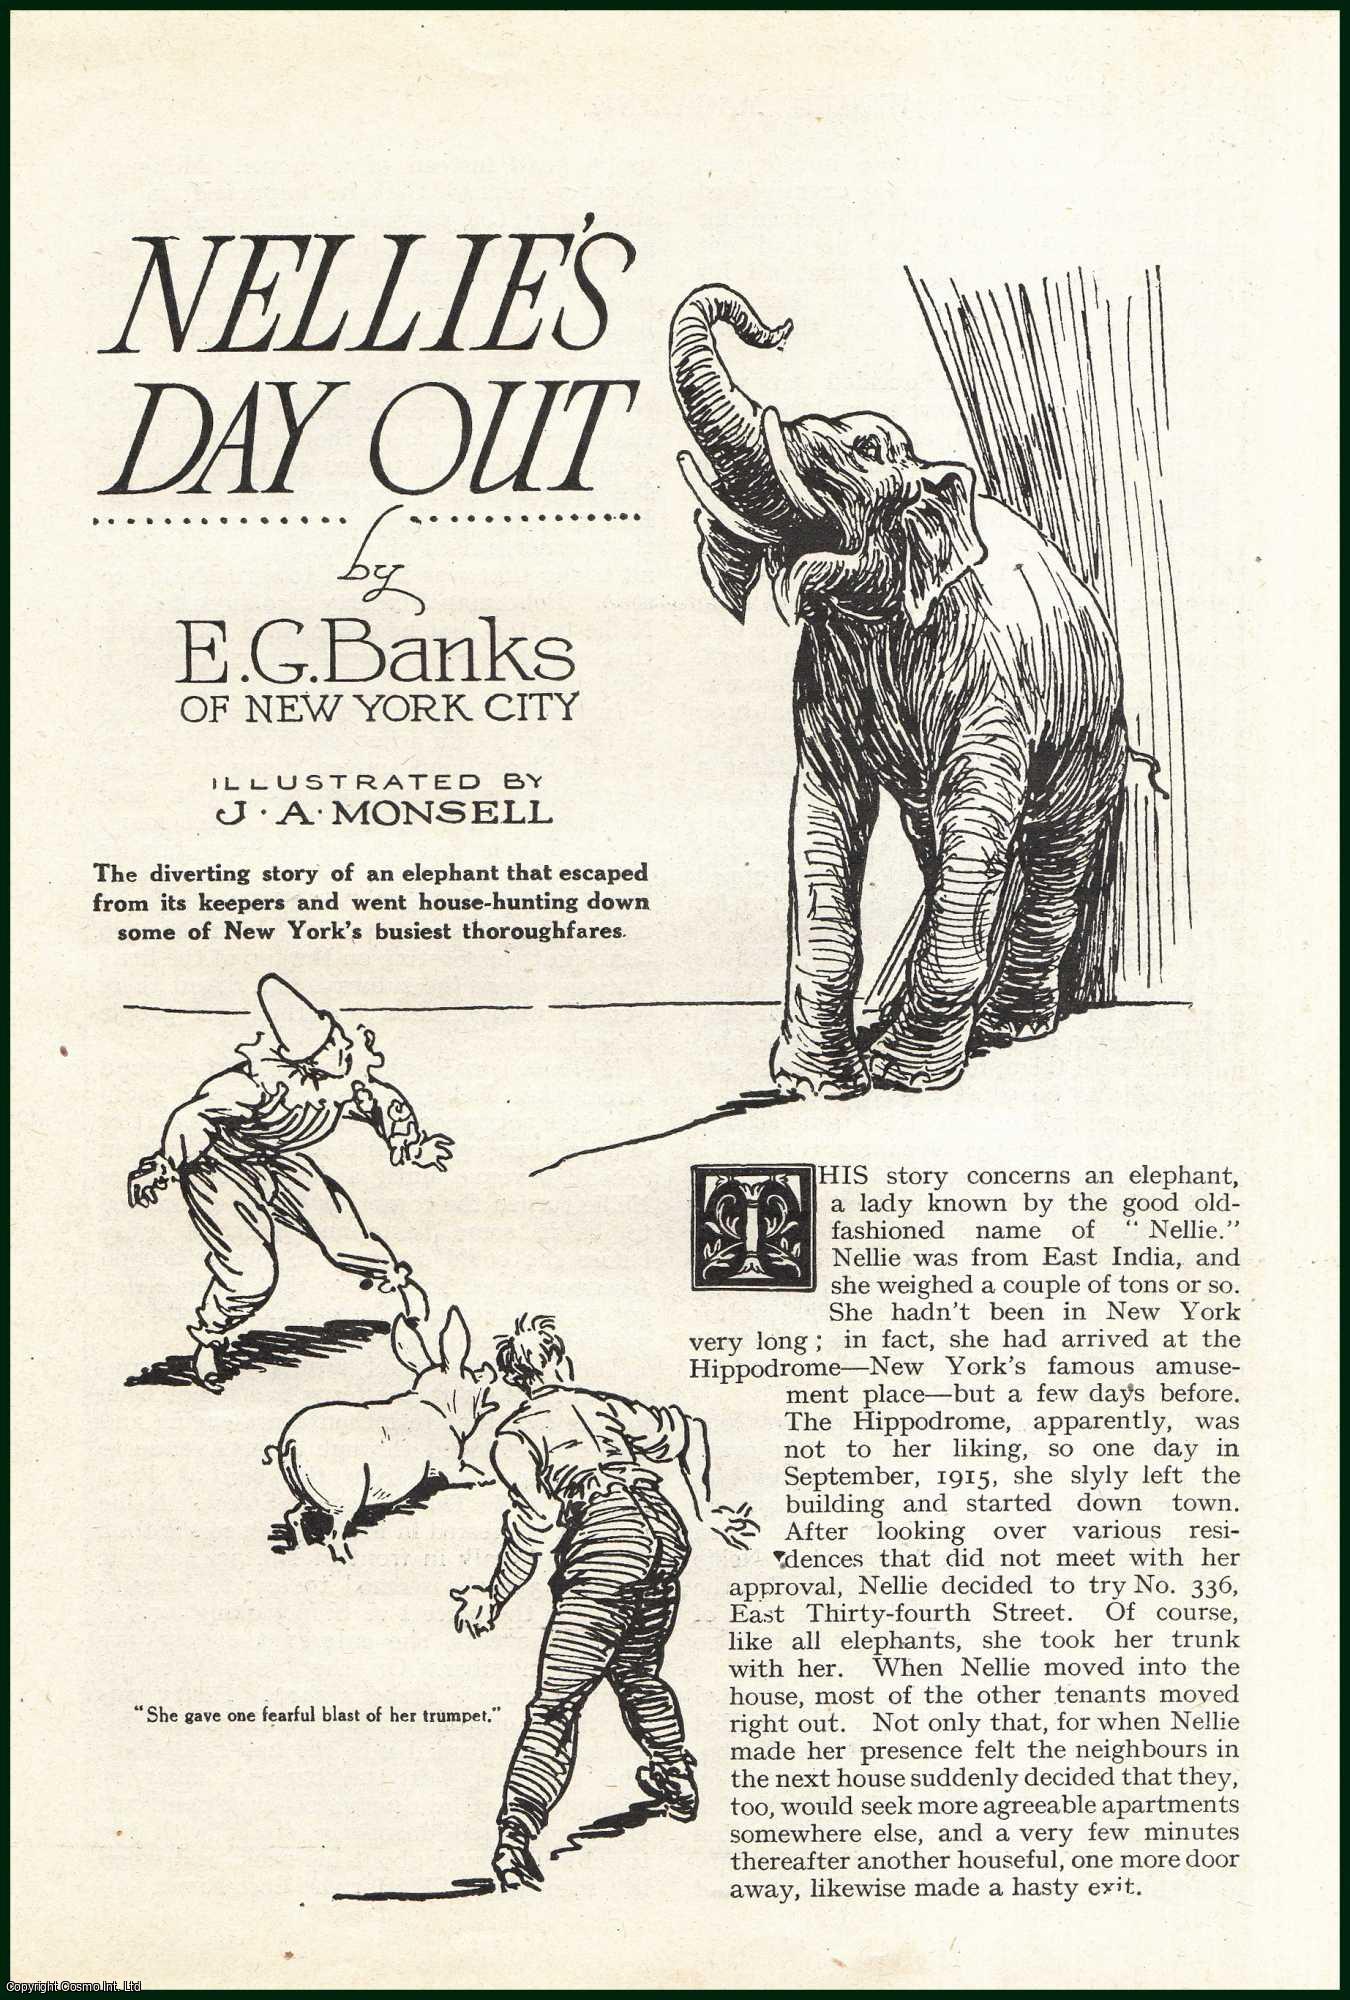 E.G. Banks of New York City, illustrated by J.A. Monsell. - Nellie's Day out : the diverting story of an elephant that escaped from its keepers & went house-hunting down some of New York's busiest thoroughfares. This is an uncommon original article from the Wide World Magazine, 1920.